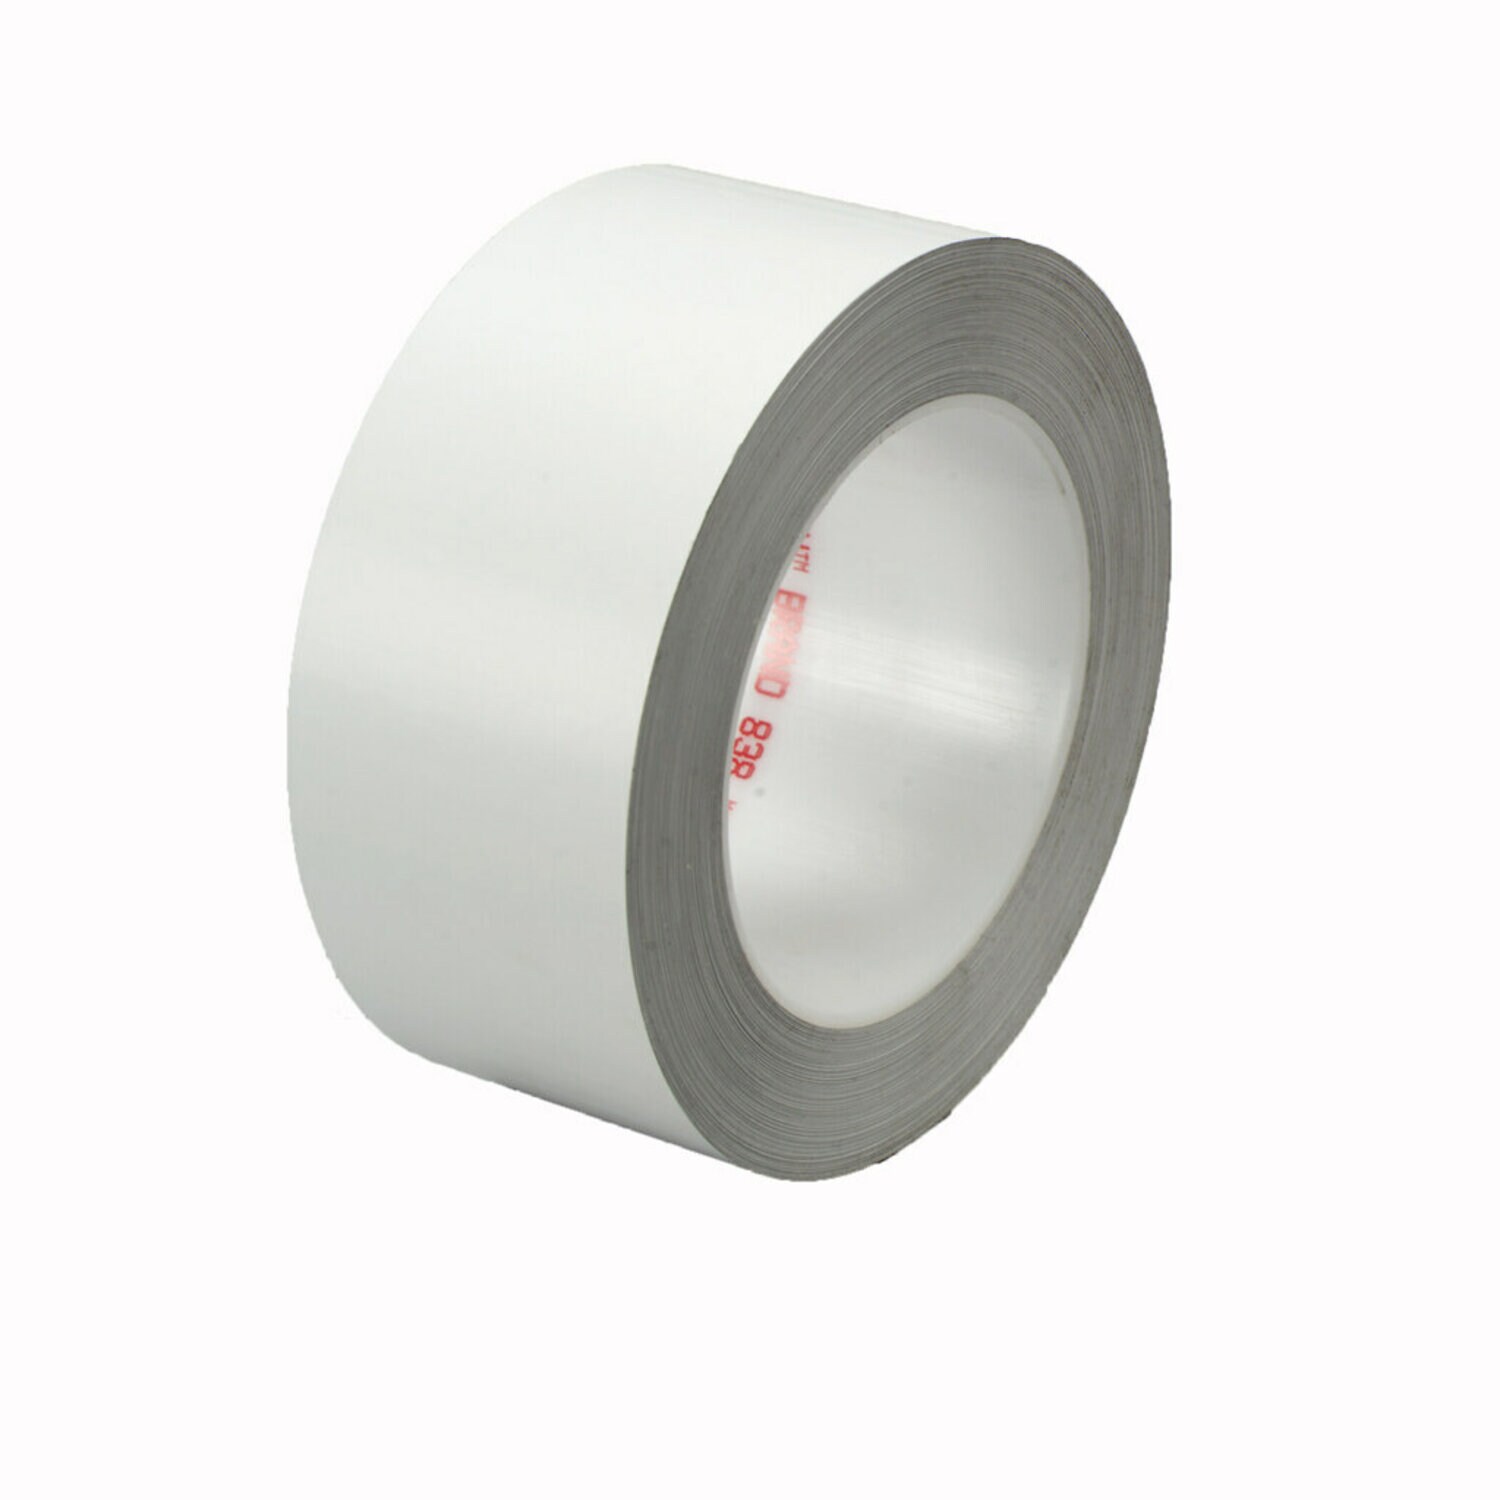 7010048654 - 3M Weather Resistant Film Tape 838, White, 3/4 in x 36 yd, 3.4 mil, 48 rolls per case